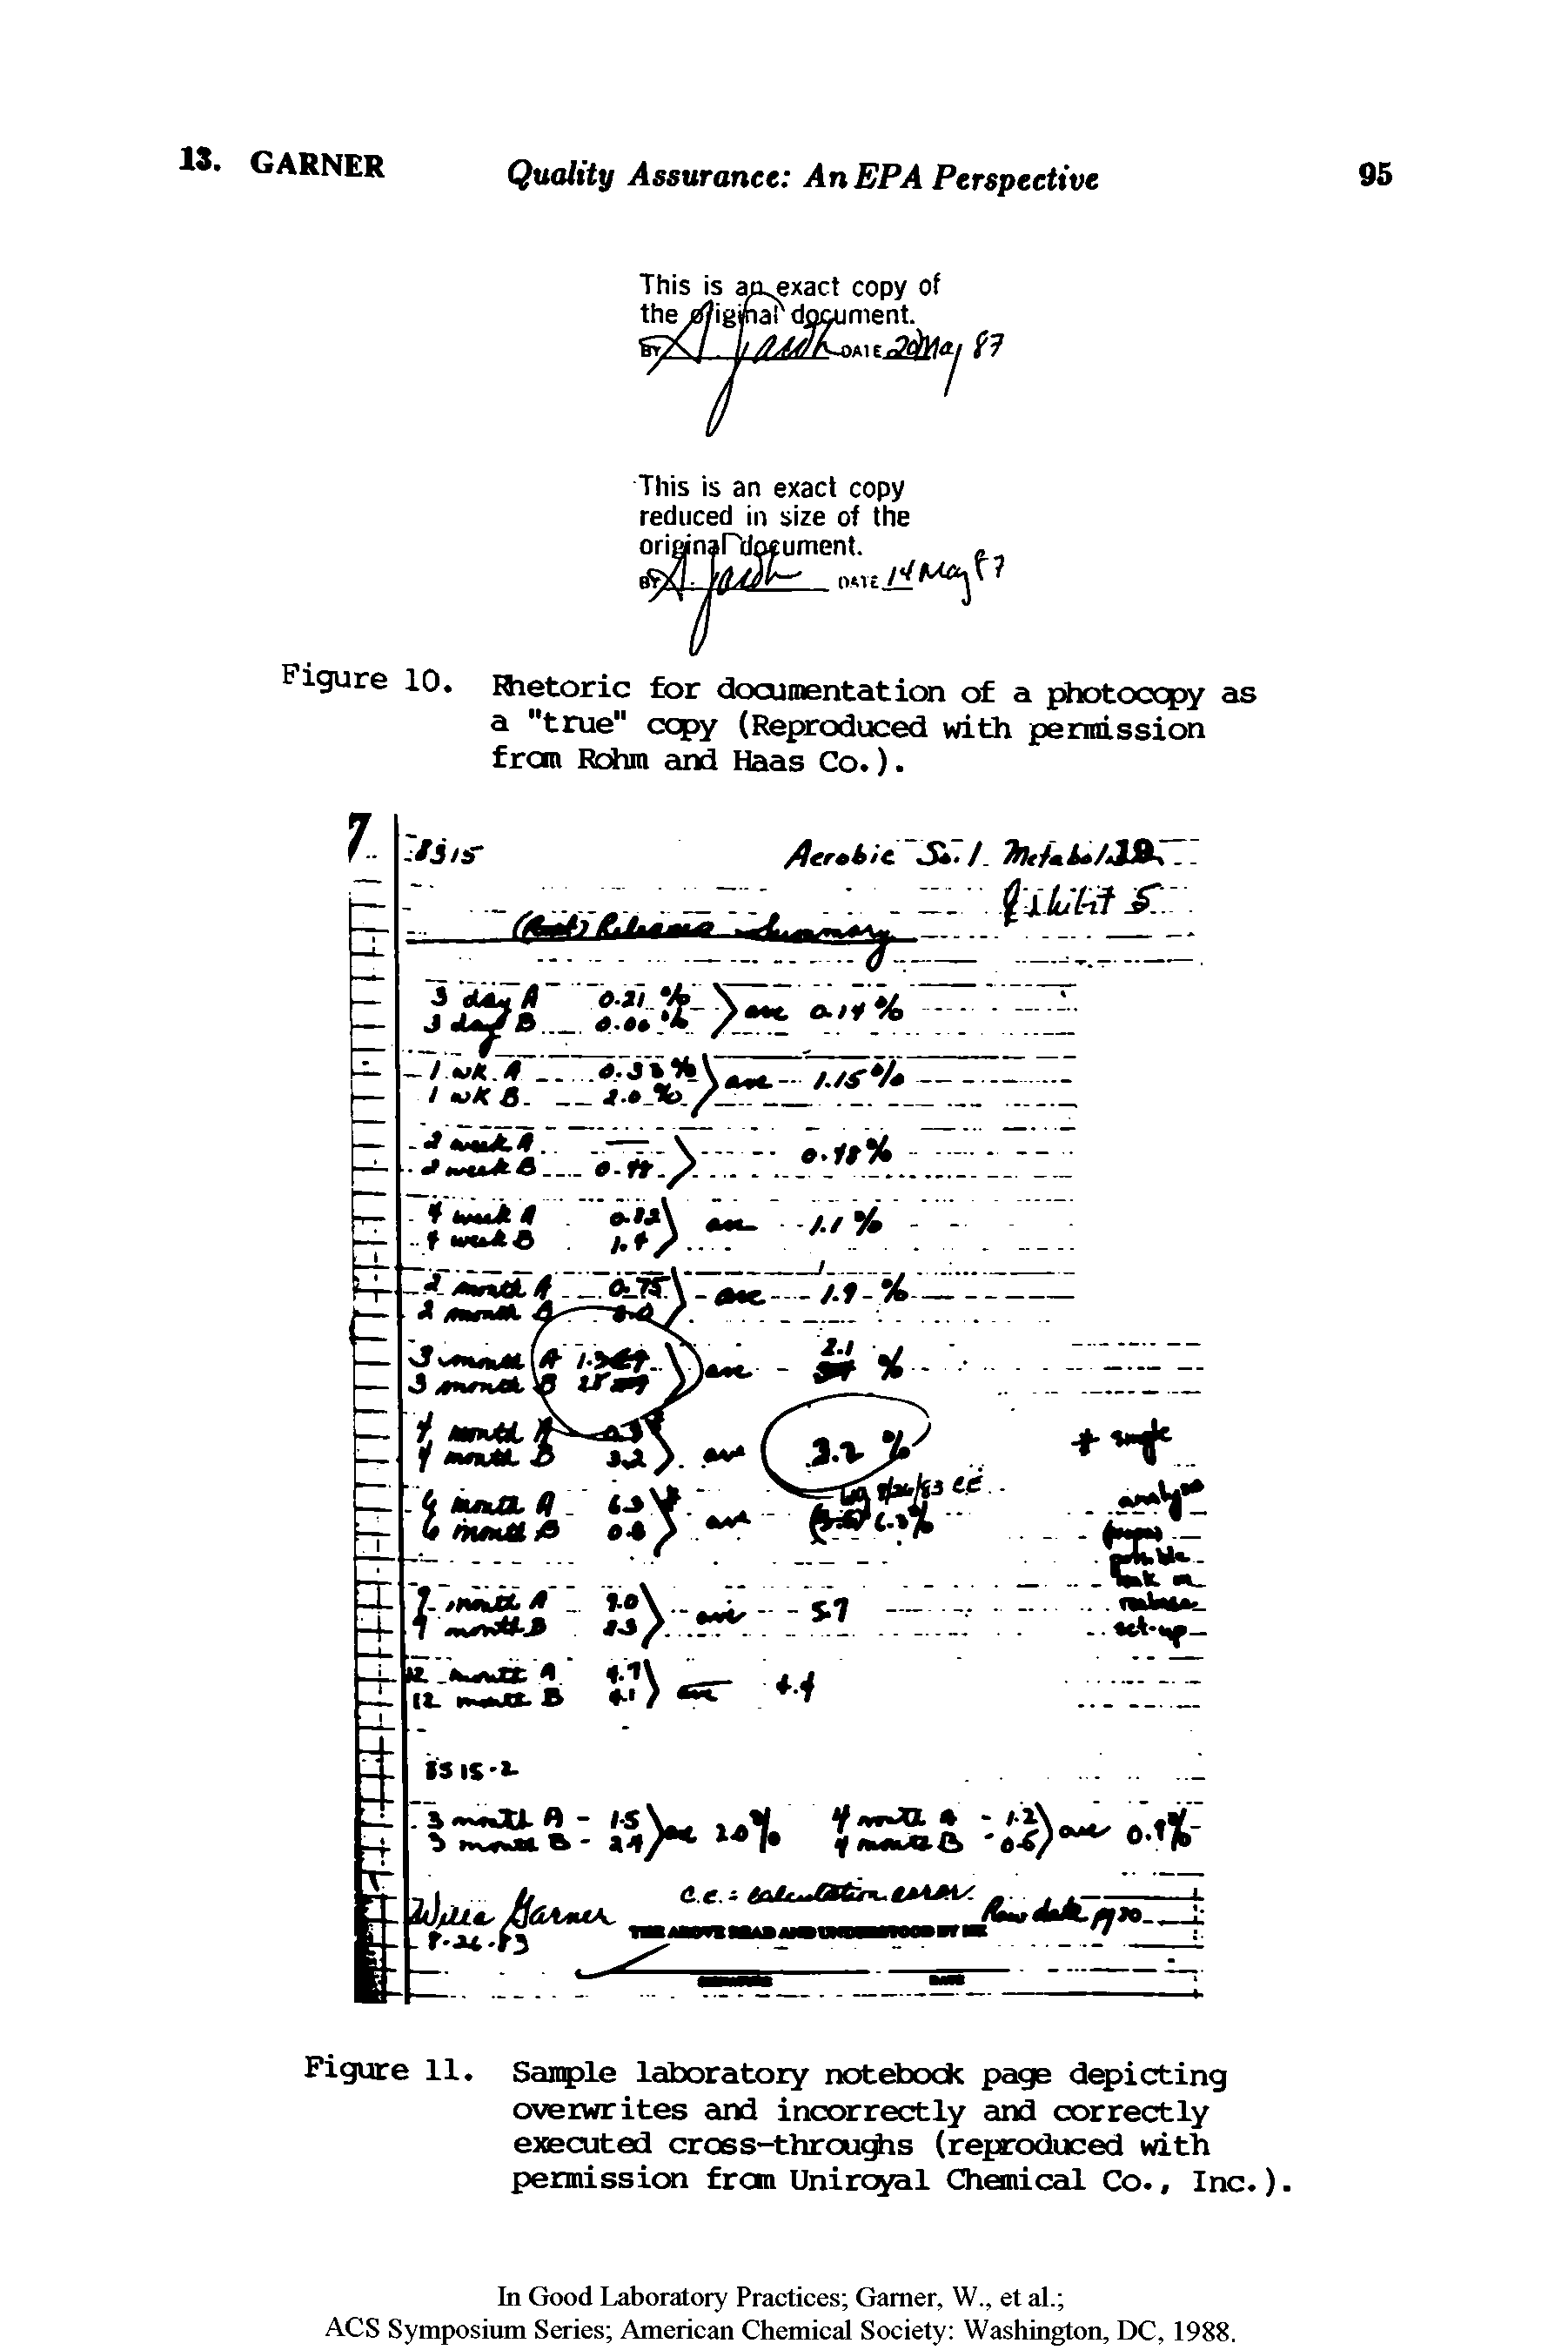 Figure 11. Sample laboratory notebook page depicting overwrites and incorrectly and correctly executed cross-throughs (reproduced with permission from Unirqyal Chemical Co., Inc.).